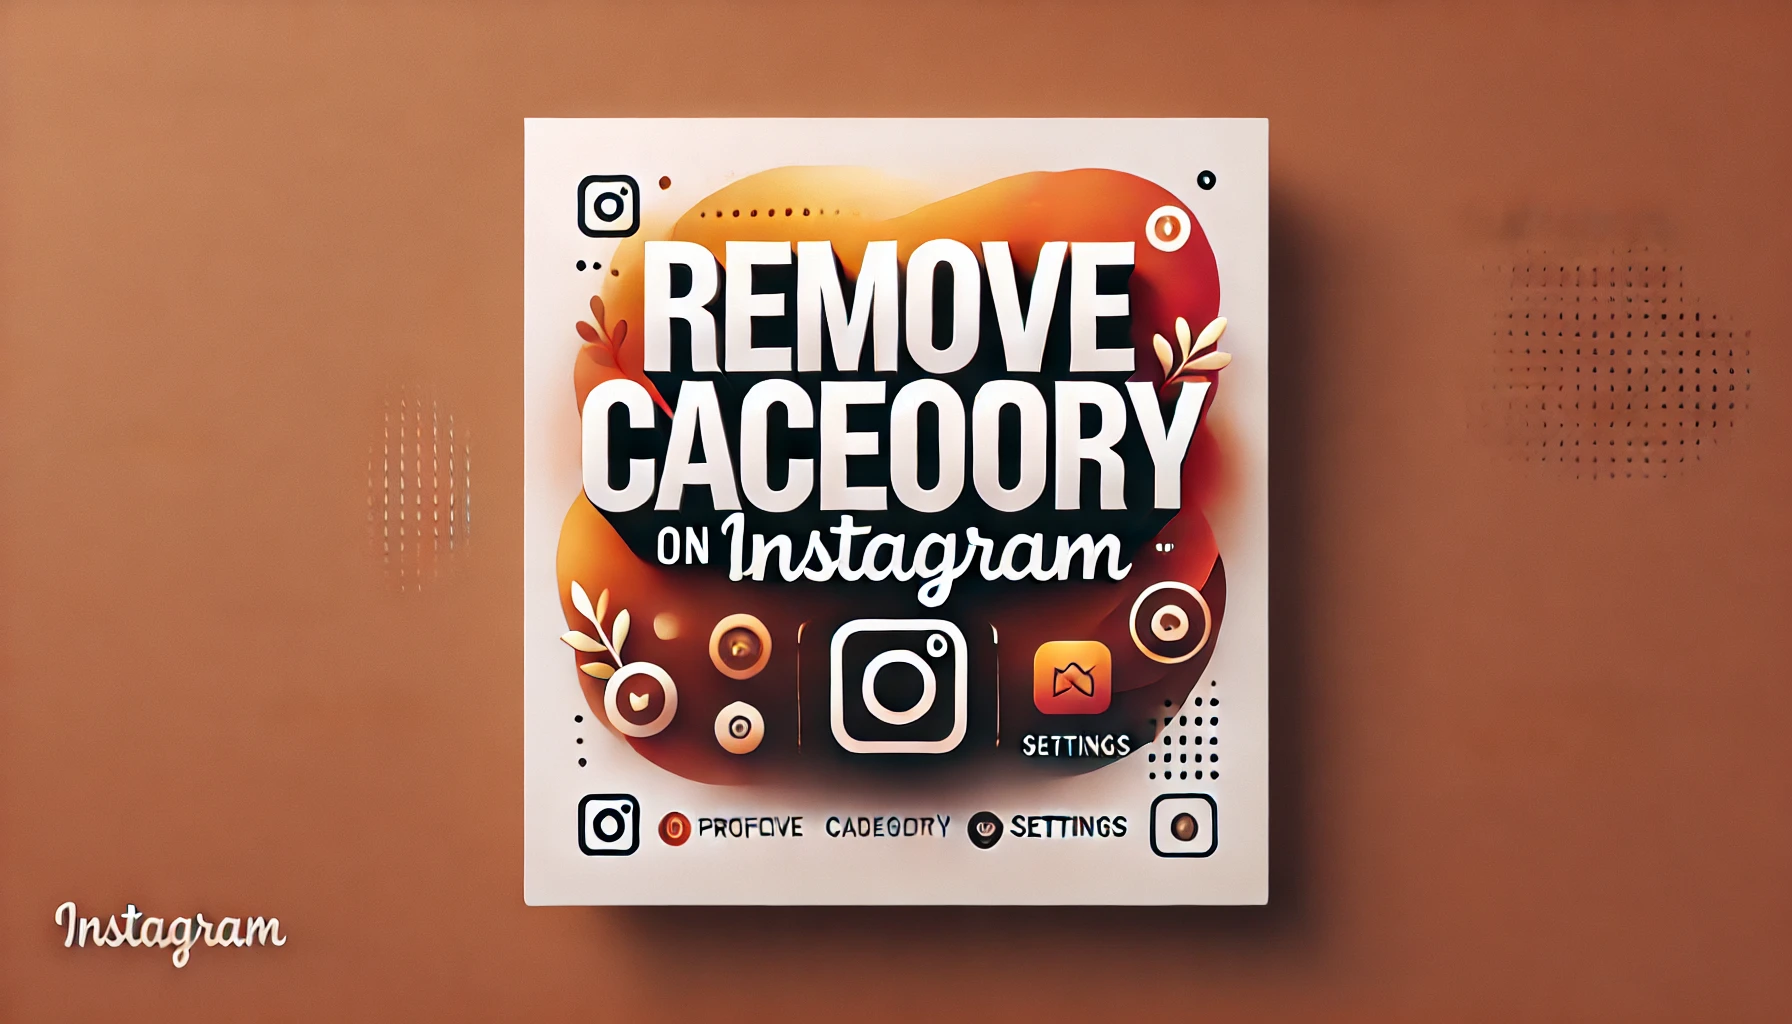 How to remove category on Instagram